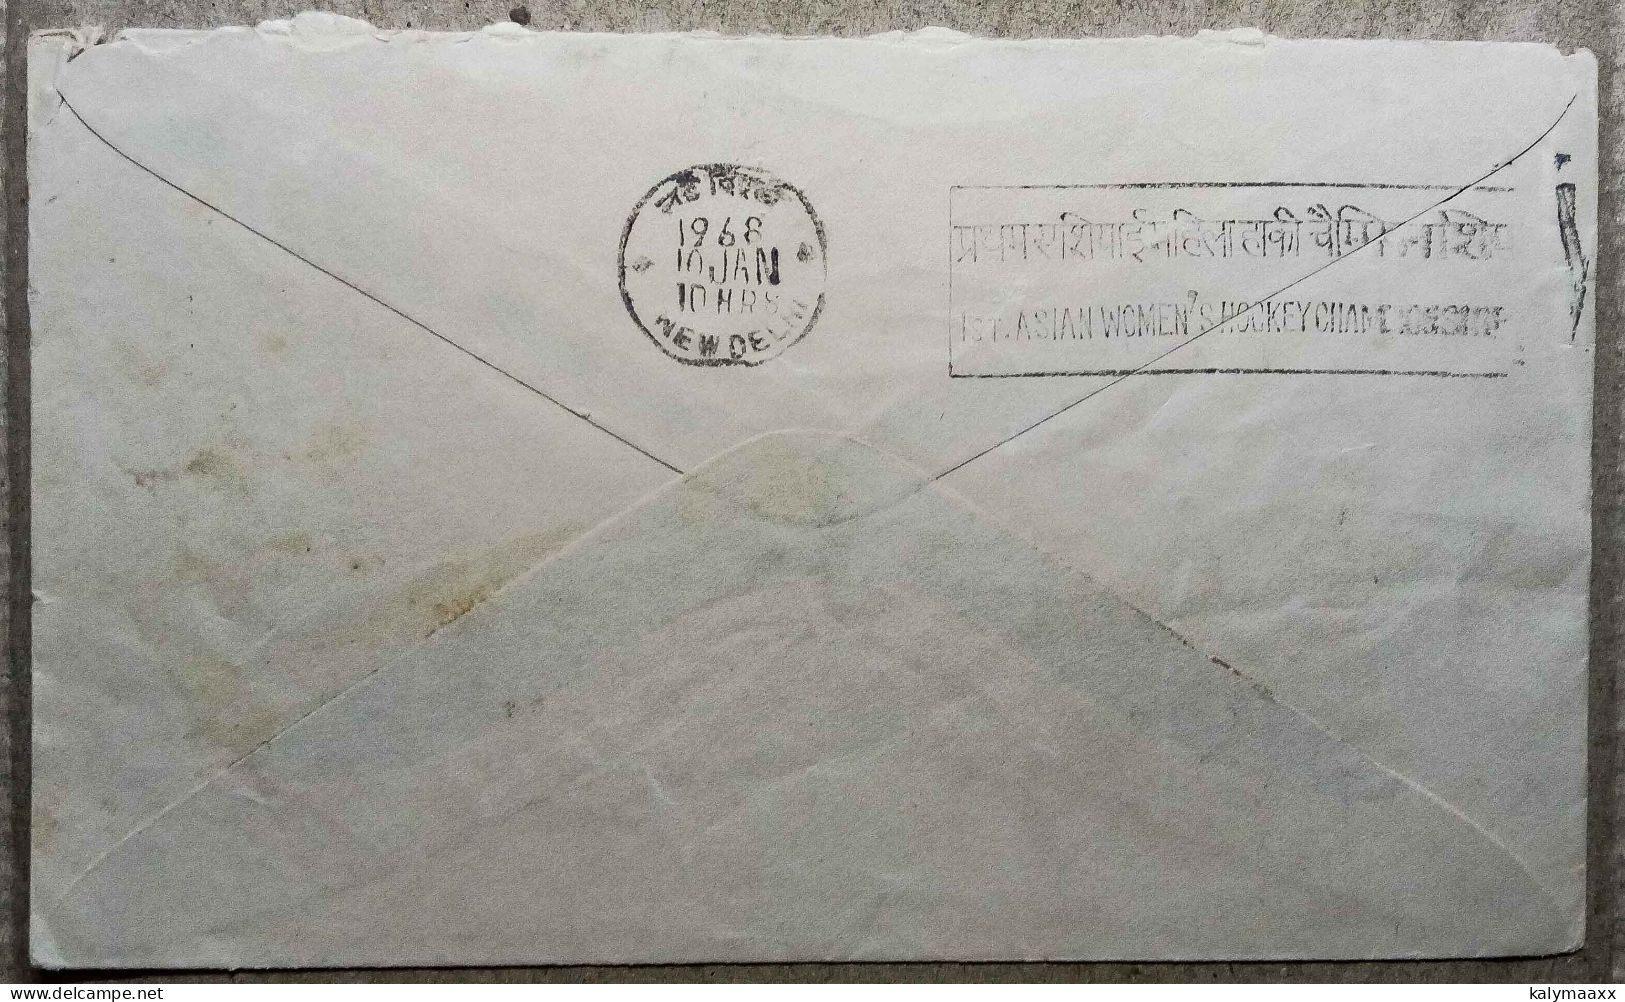 INDIA 1968 FIRST ASIAN WOMEN'S HOCKEY CHAMPIONSHIP, SLOGAN DELIVERY POSTMARK, COMMERCIALLY USED COVER, RARE - Hockey (Field)